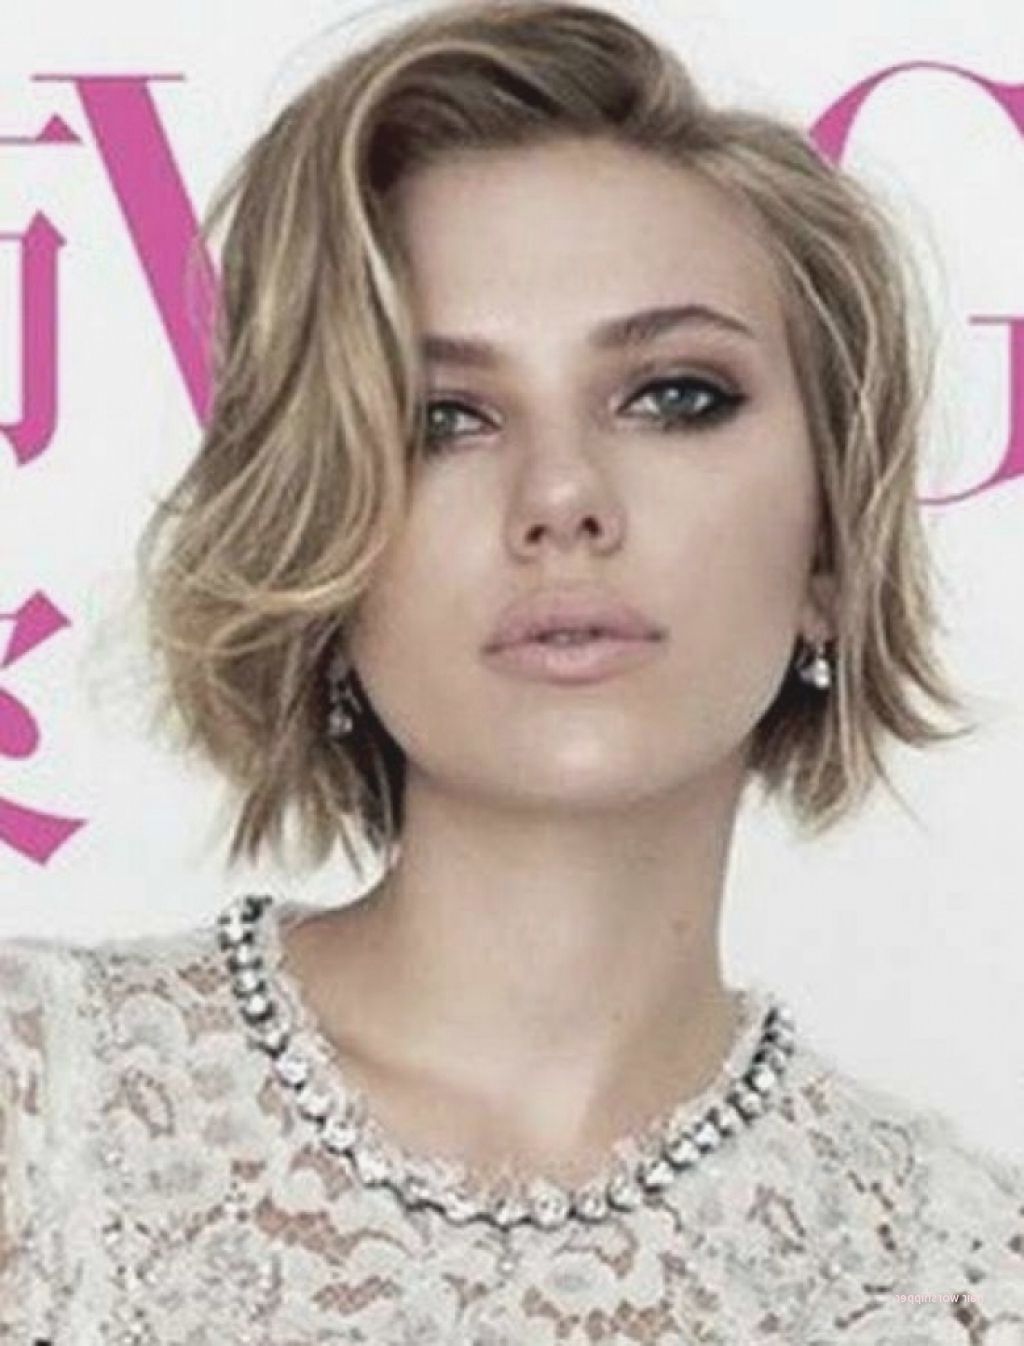 Elegant Short Haircuts For Thick Wavy Hair Square Face – Hair Worshipper Within Short Hairstyles For Thick Wavy Hair (View 21 of 25)